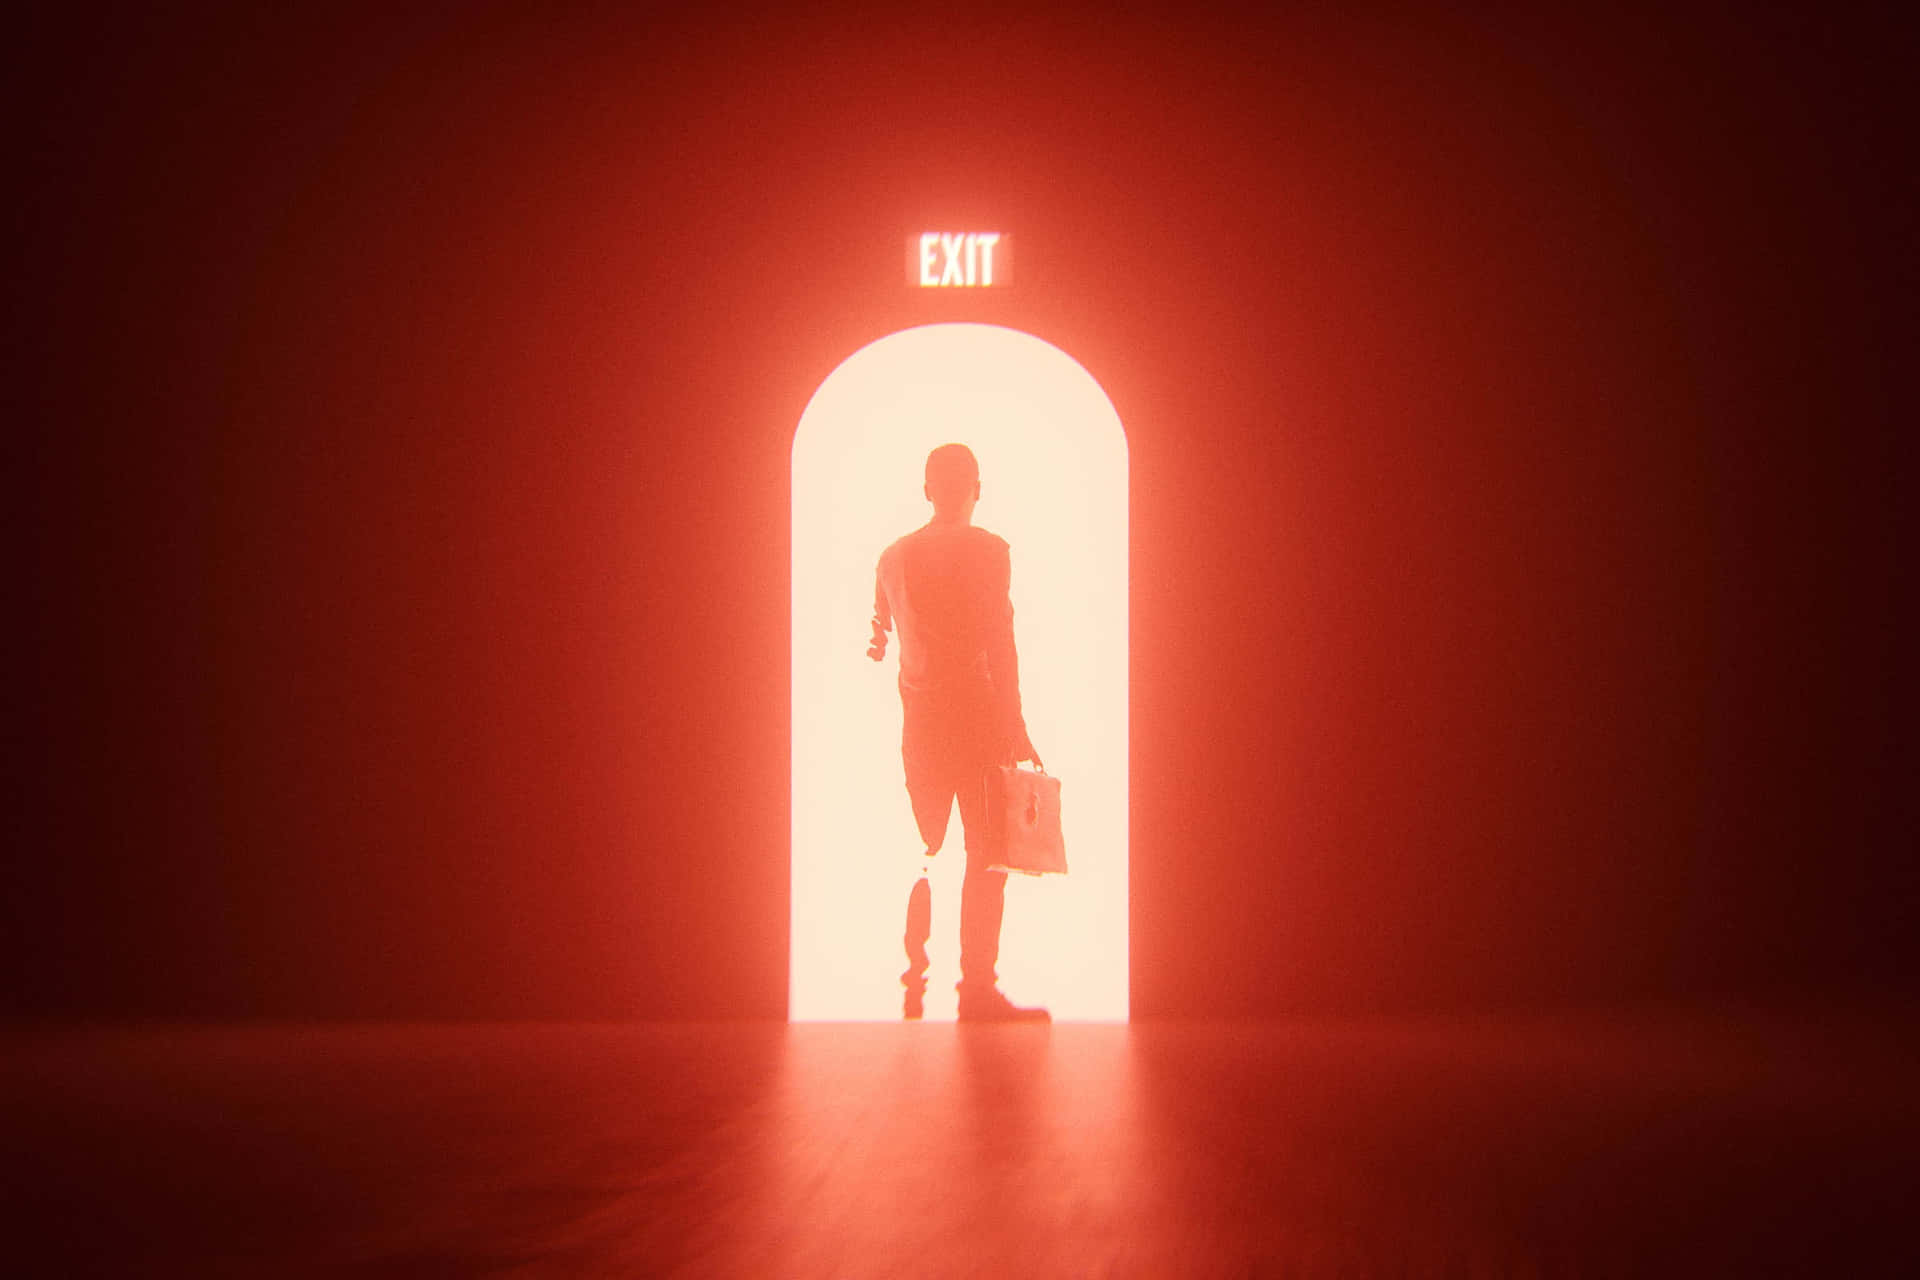 Man Silhouette In Red Room Exit Picture